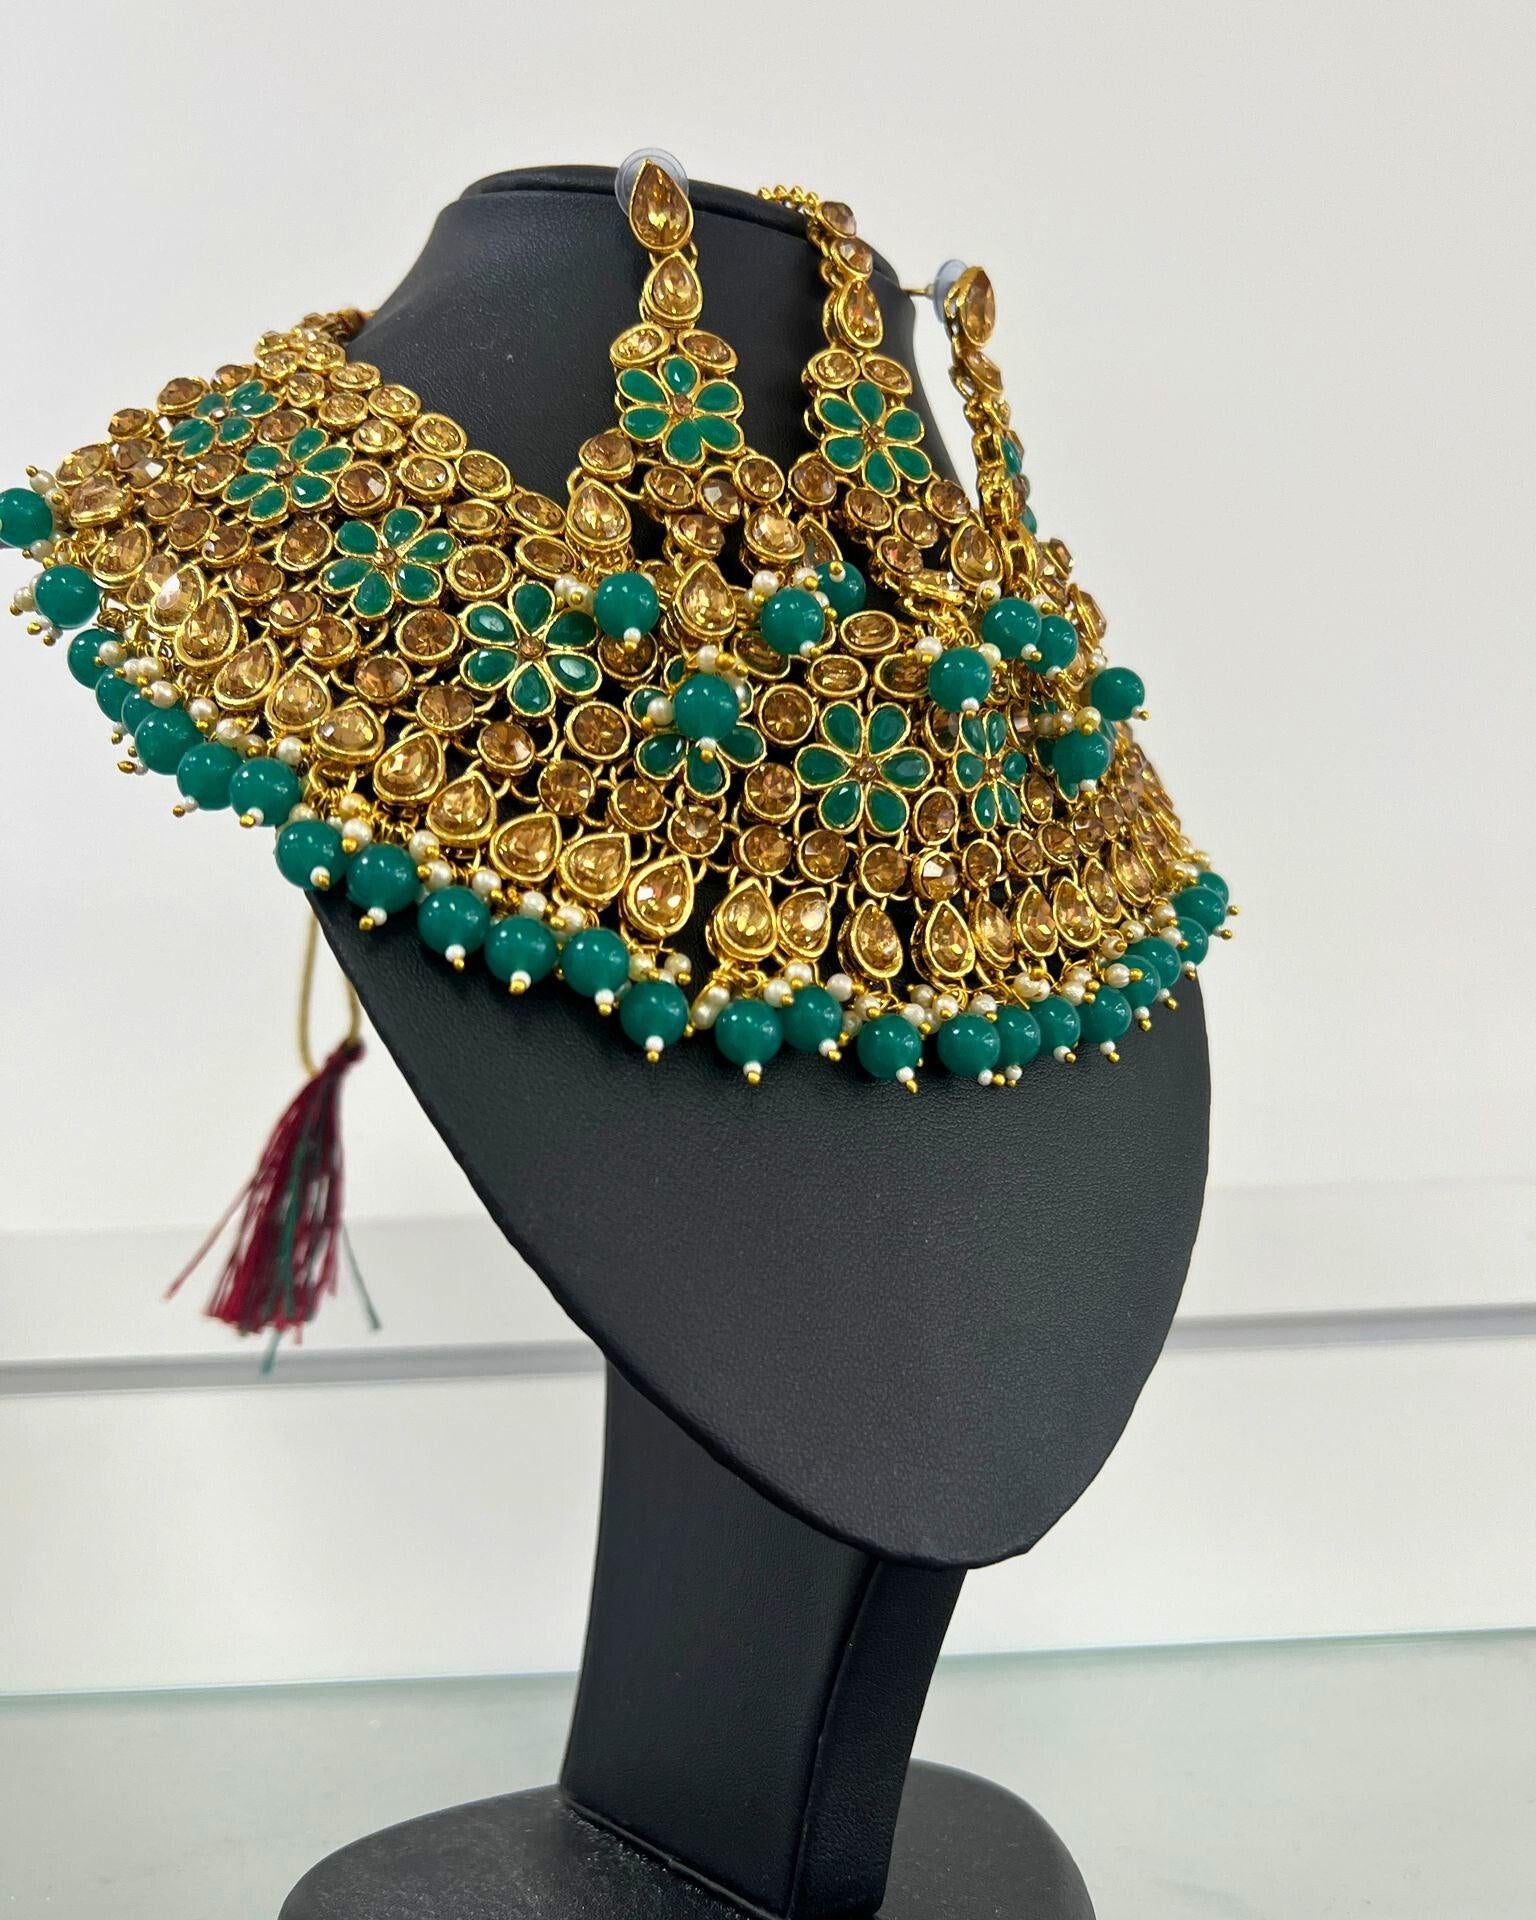 Choker Neckless Set In Green and Gold - Boutique Nepal Au